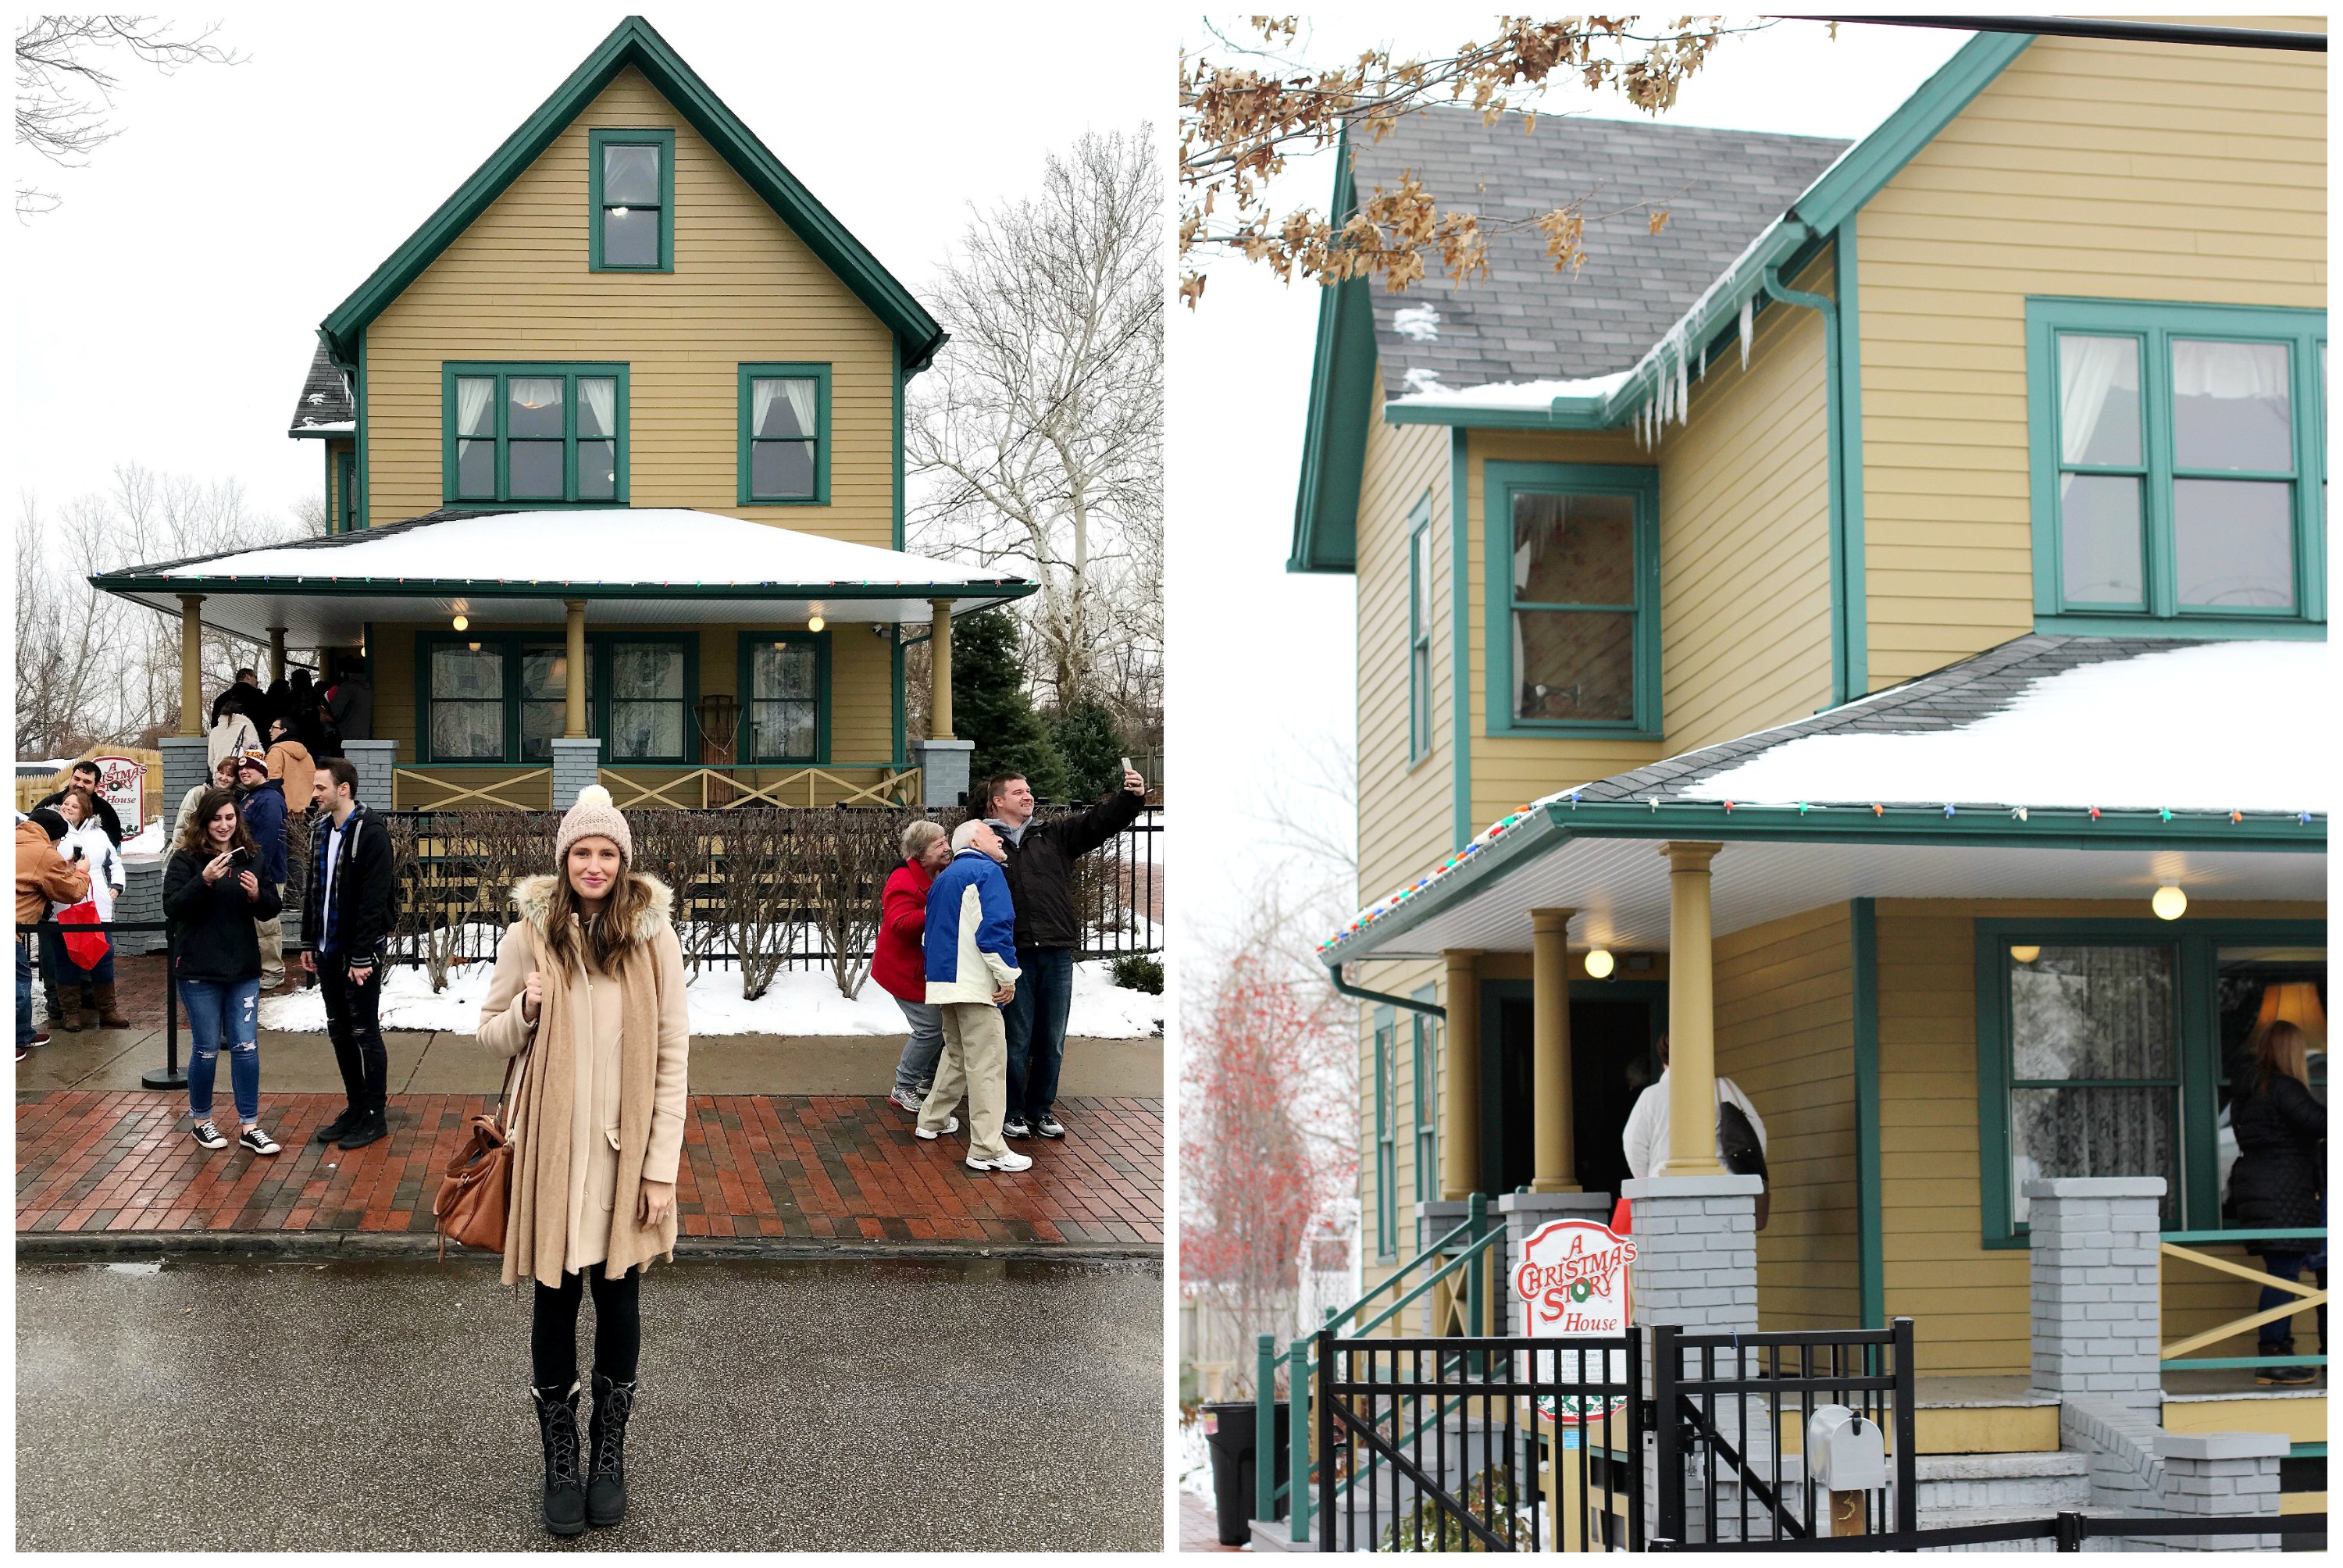 A Christmas Story House in Cleveland